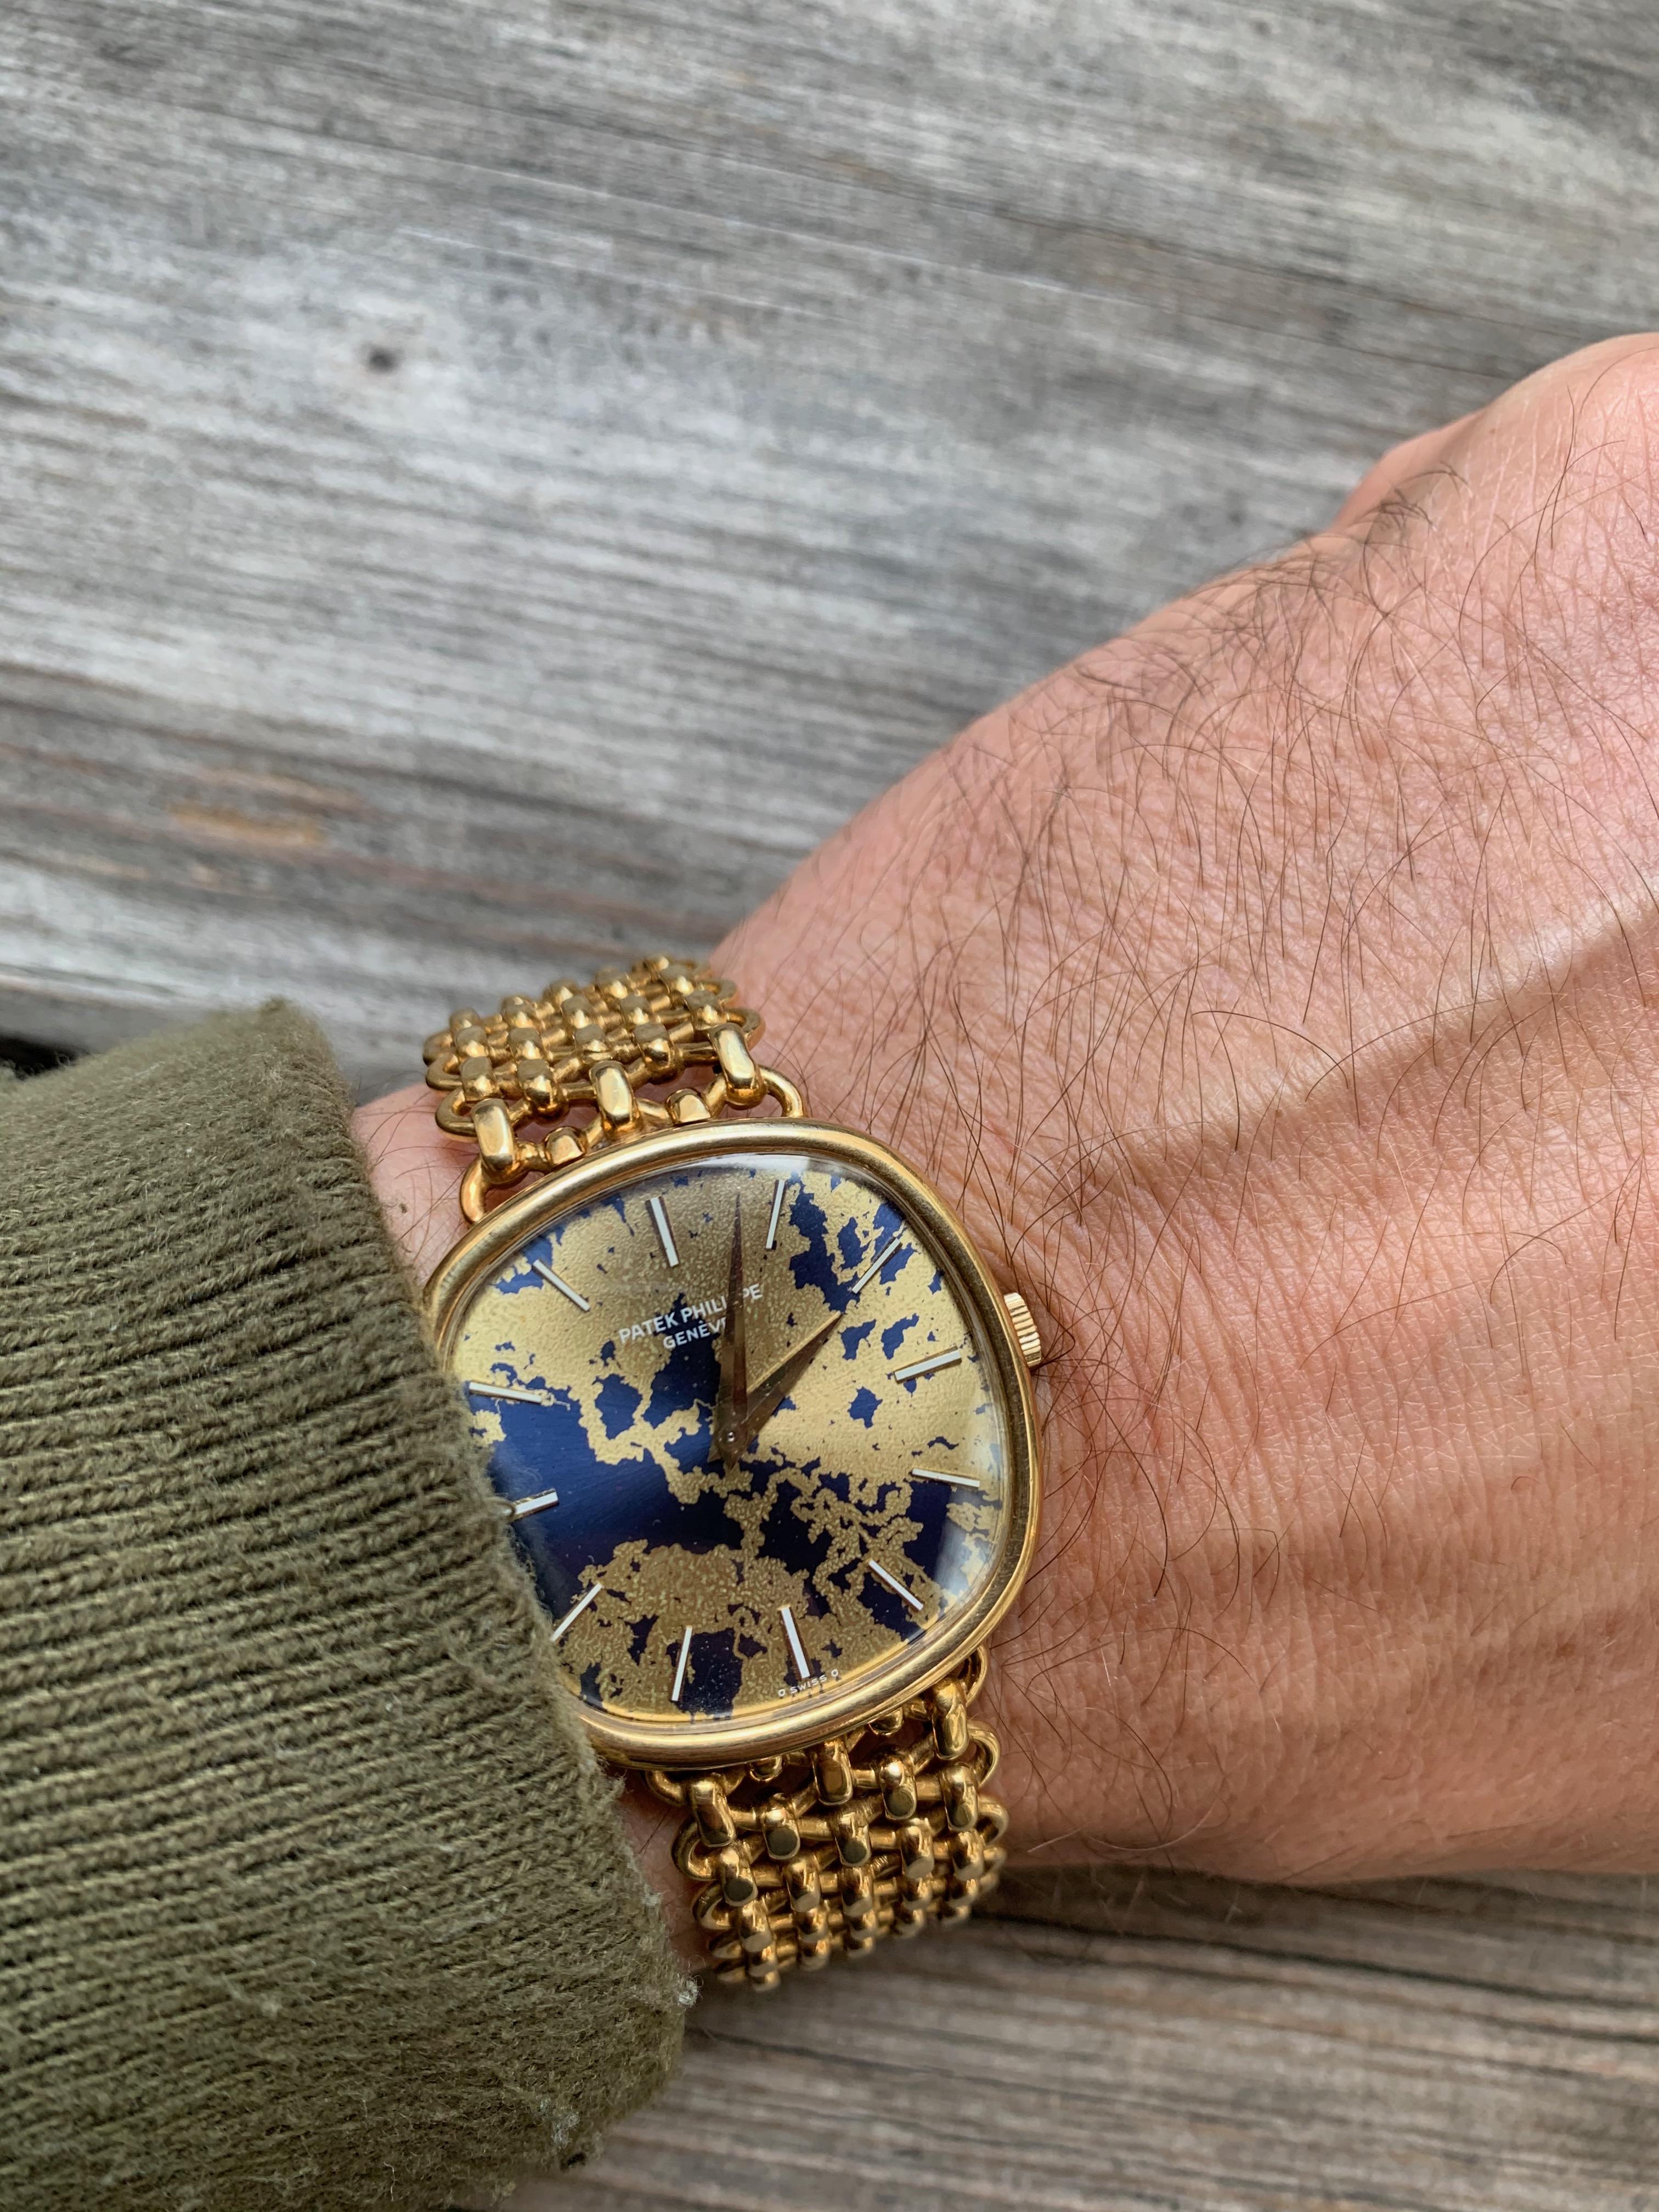 Unique Patek Philippe 3844 with Amazing Worldmap Dial / 4. of july ! For Sale 6